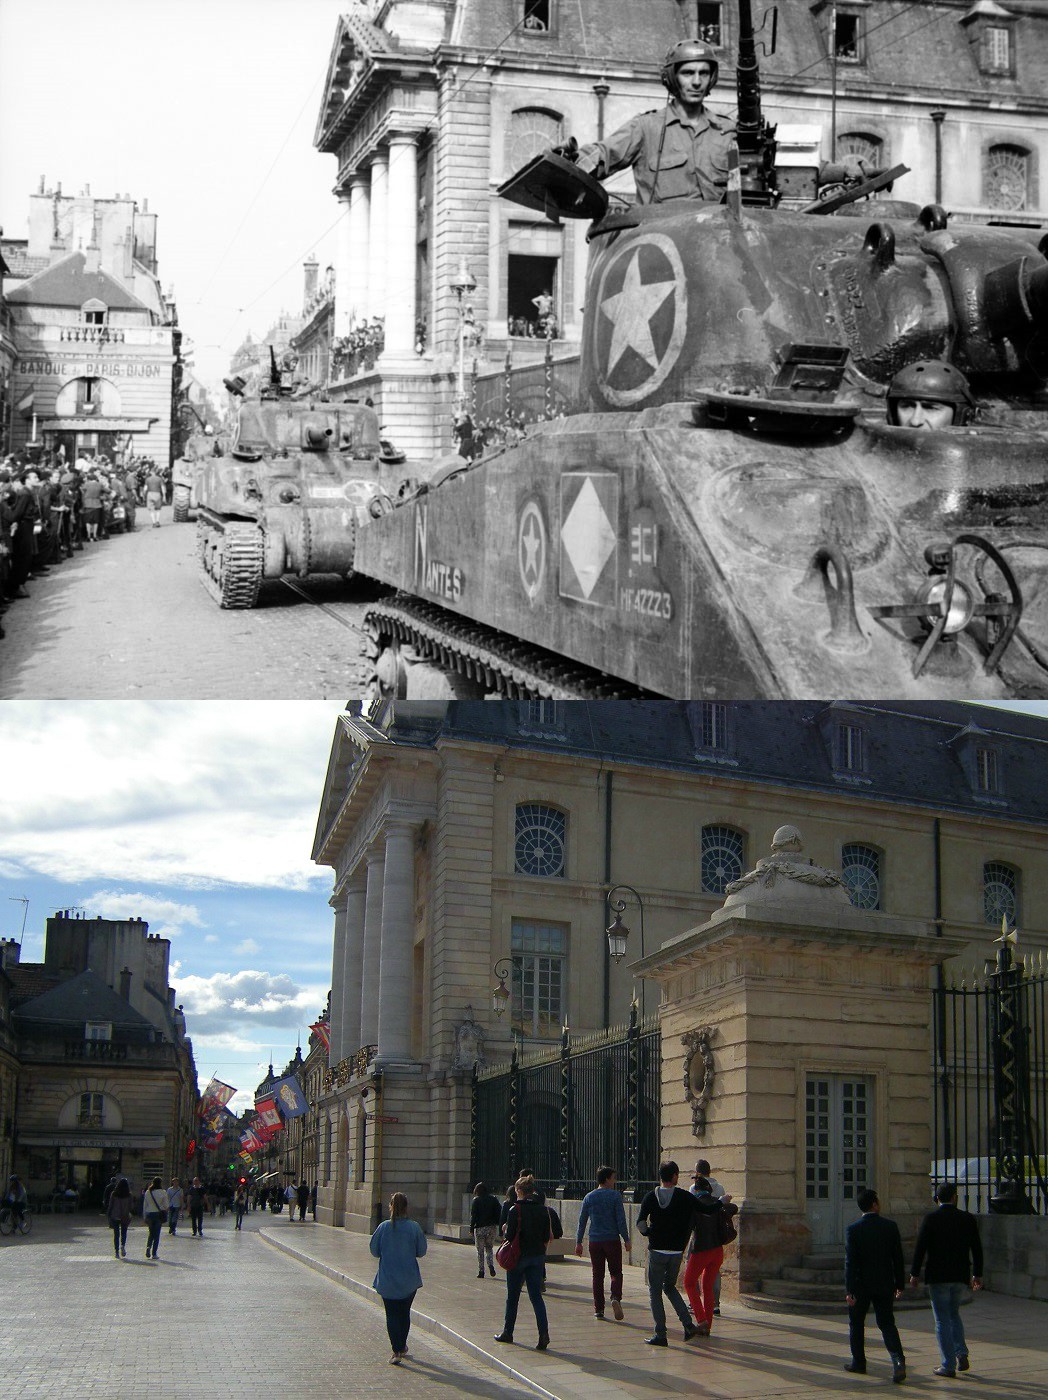 Free French Forces, aboard Shermans, arrive in front of the Palace. The square is renamed Liberation Square for the occasion.